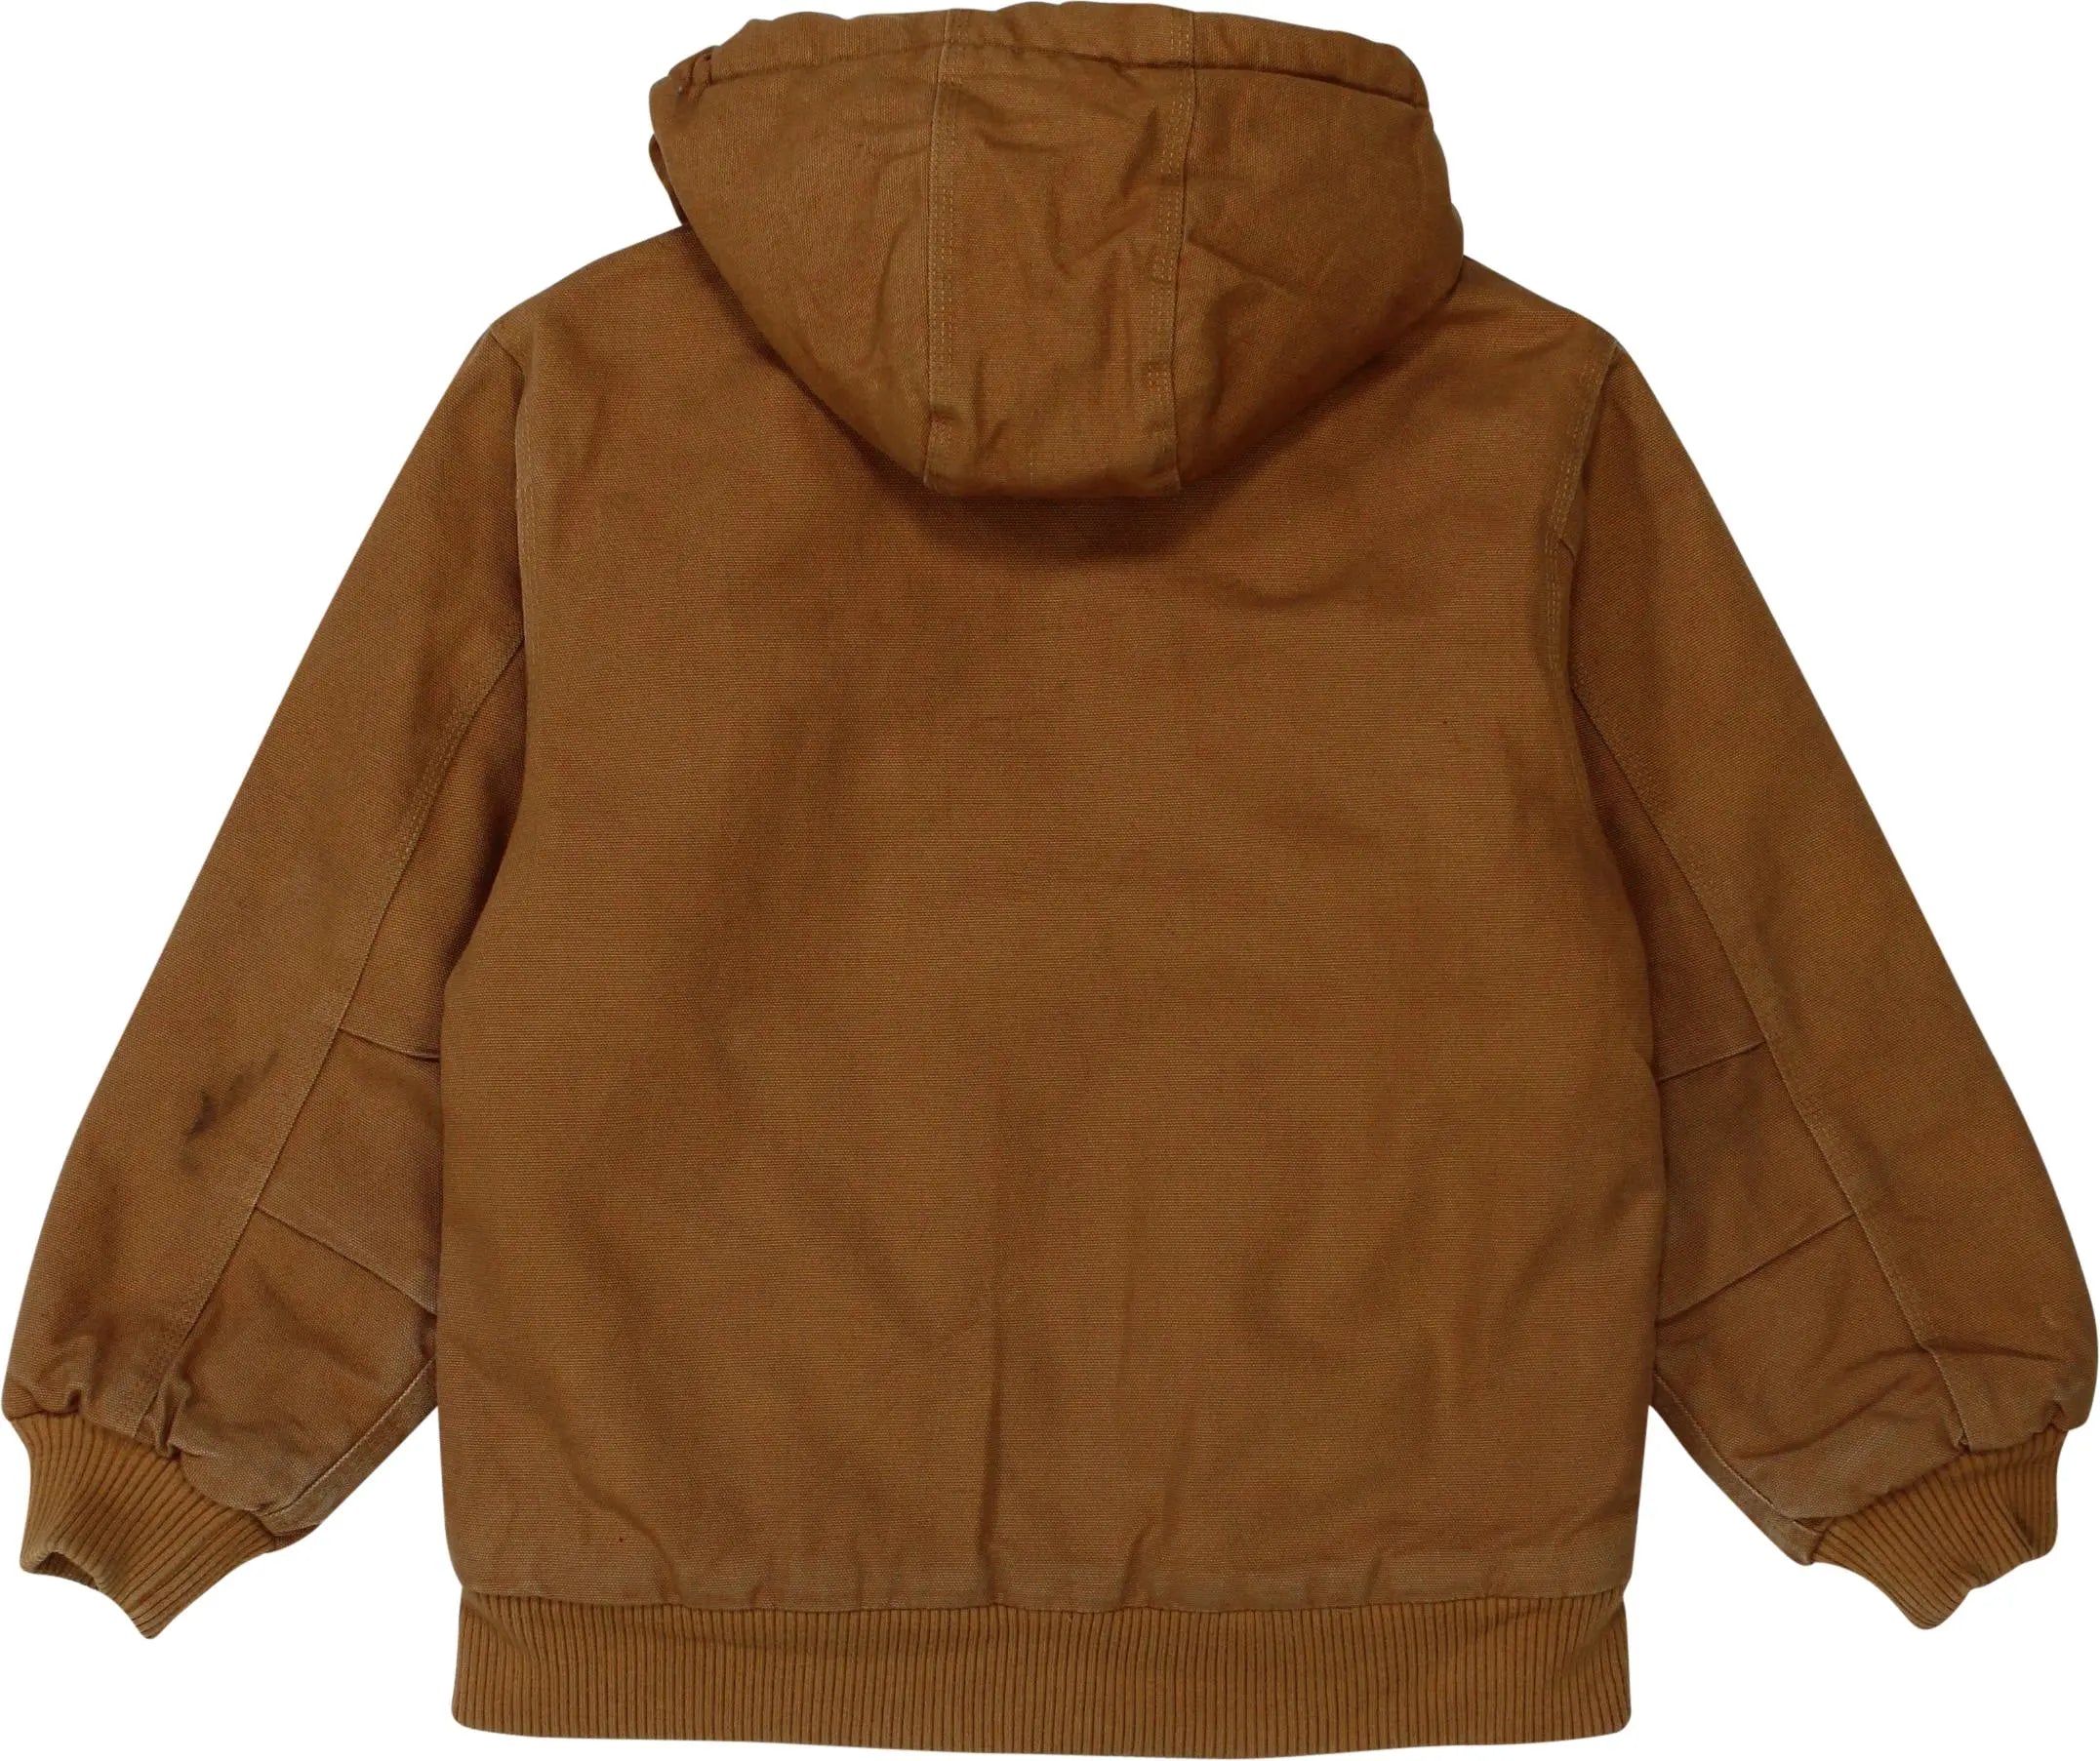 Carhartt - Brown Winter Jacket by Carhartt- ThriftTale.com - Vintage and second handclothing